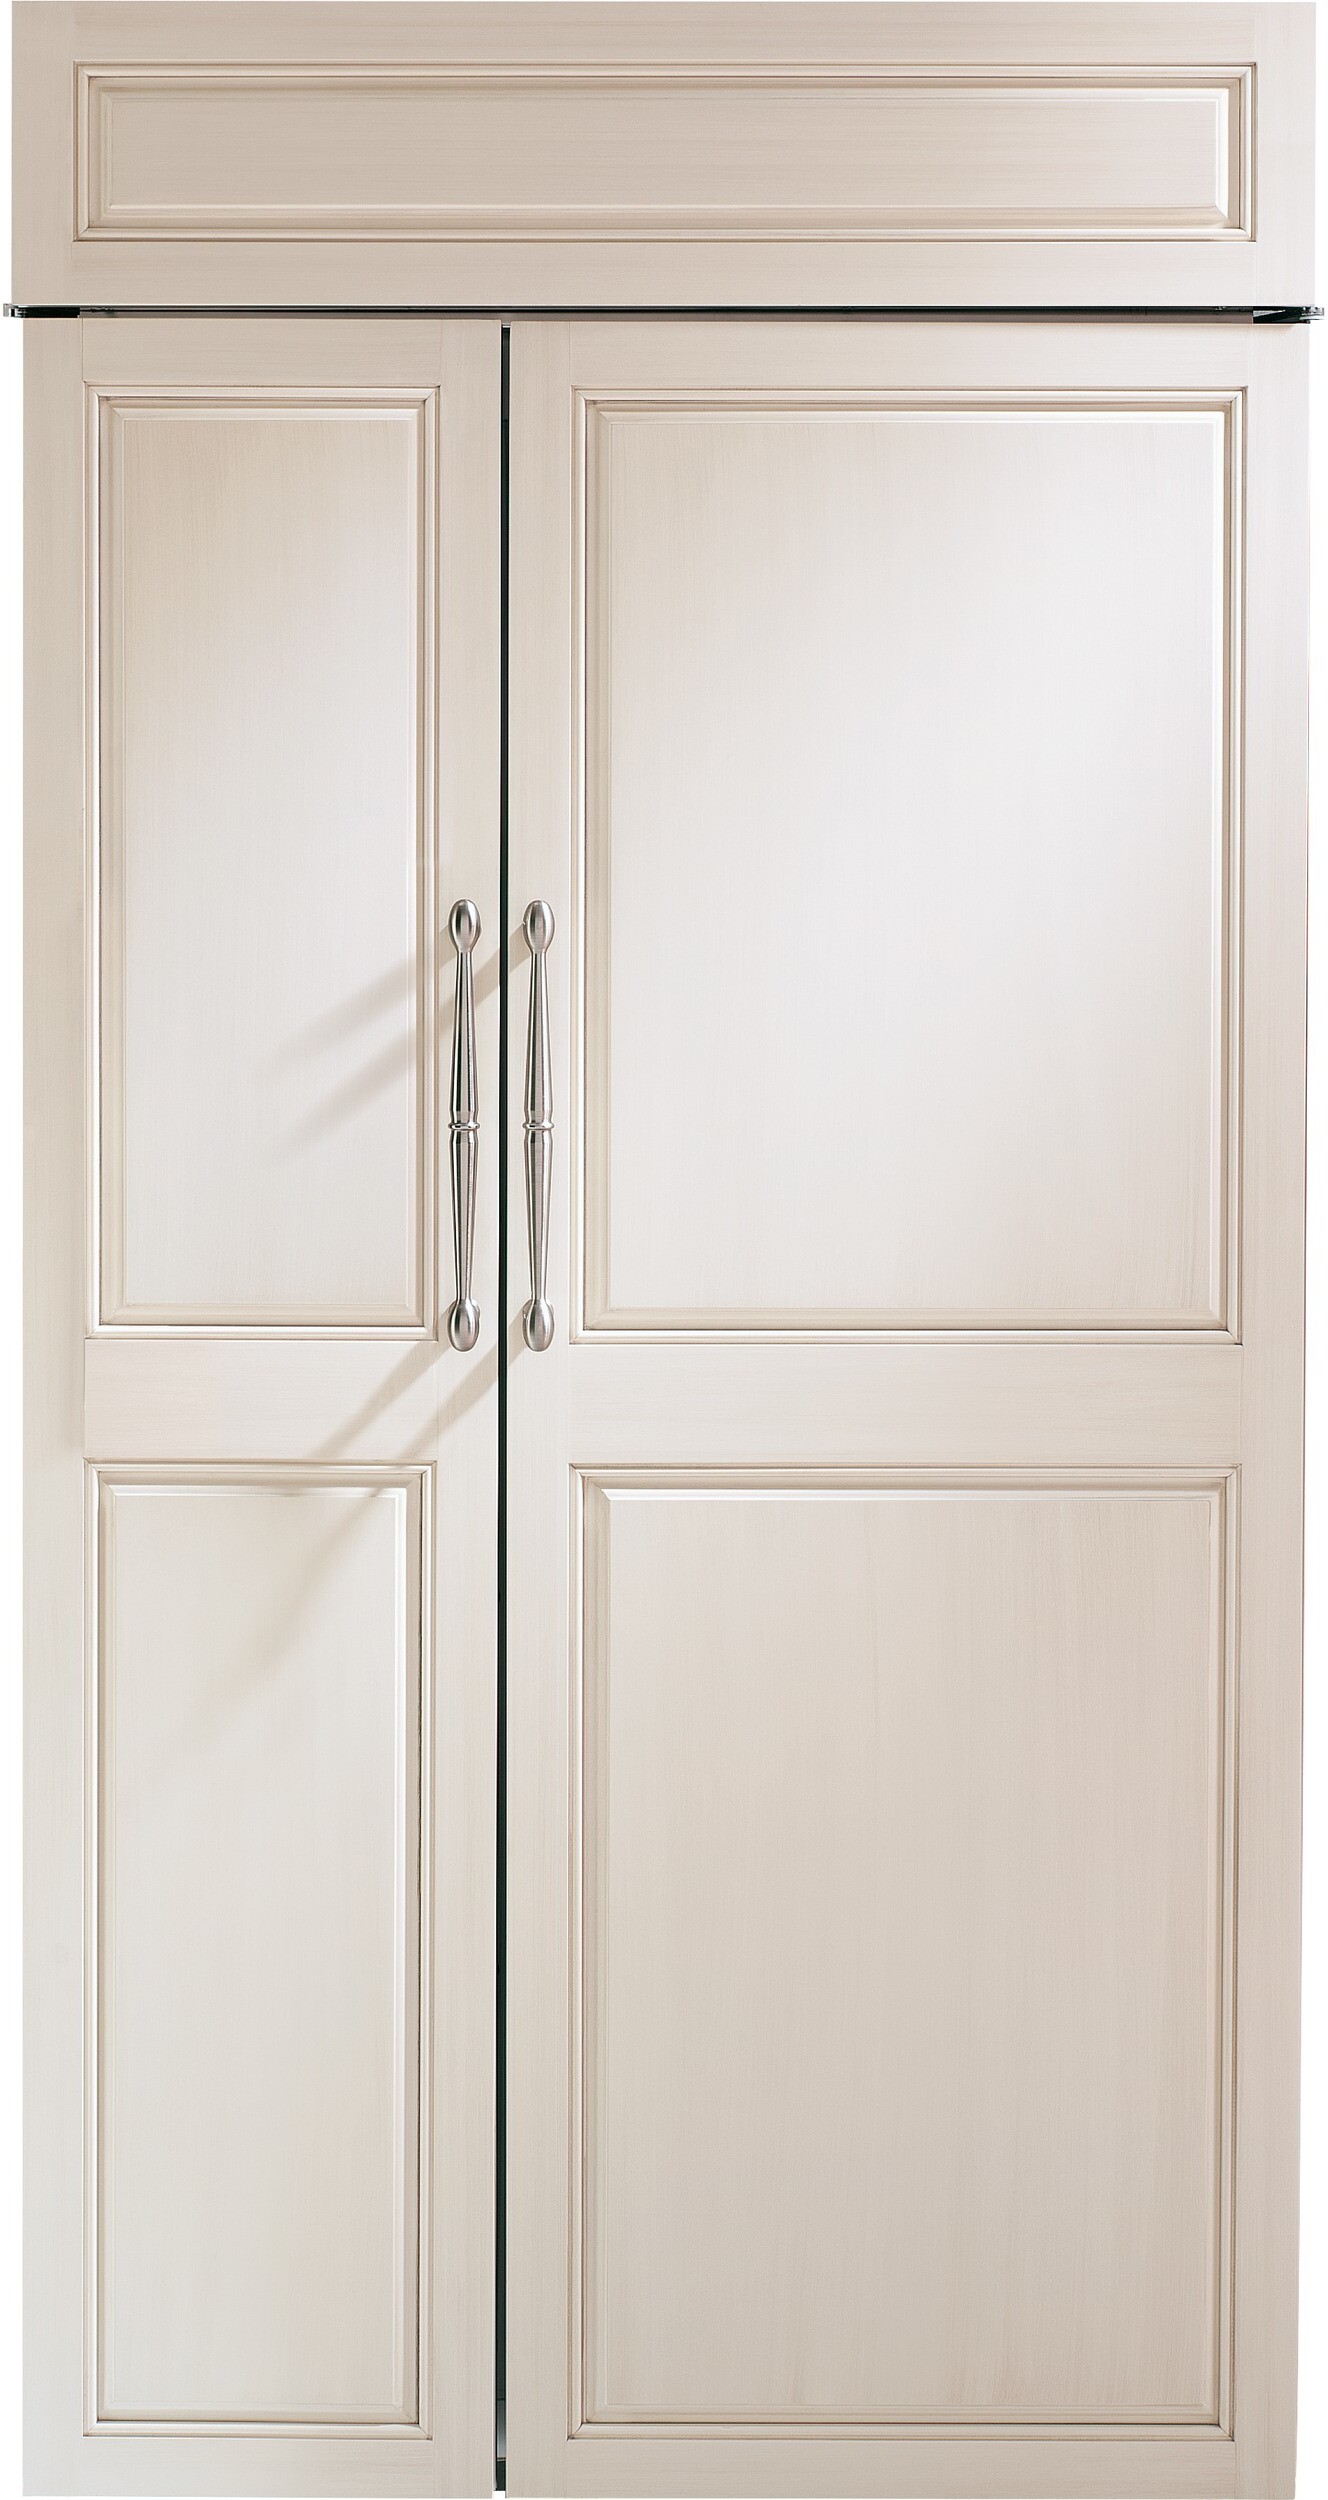 Monogram 42 Inch 42 Built In Counter Depth Side-by-Side Refrigerator ZIS420NNII